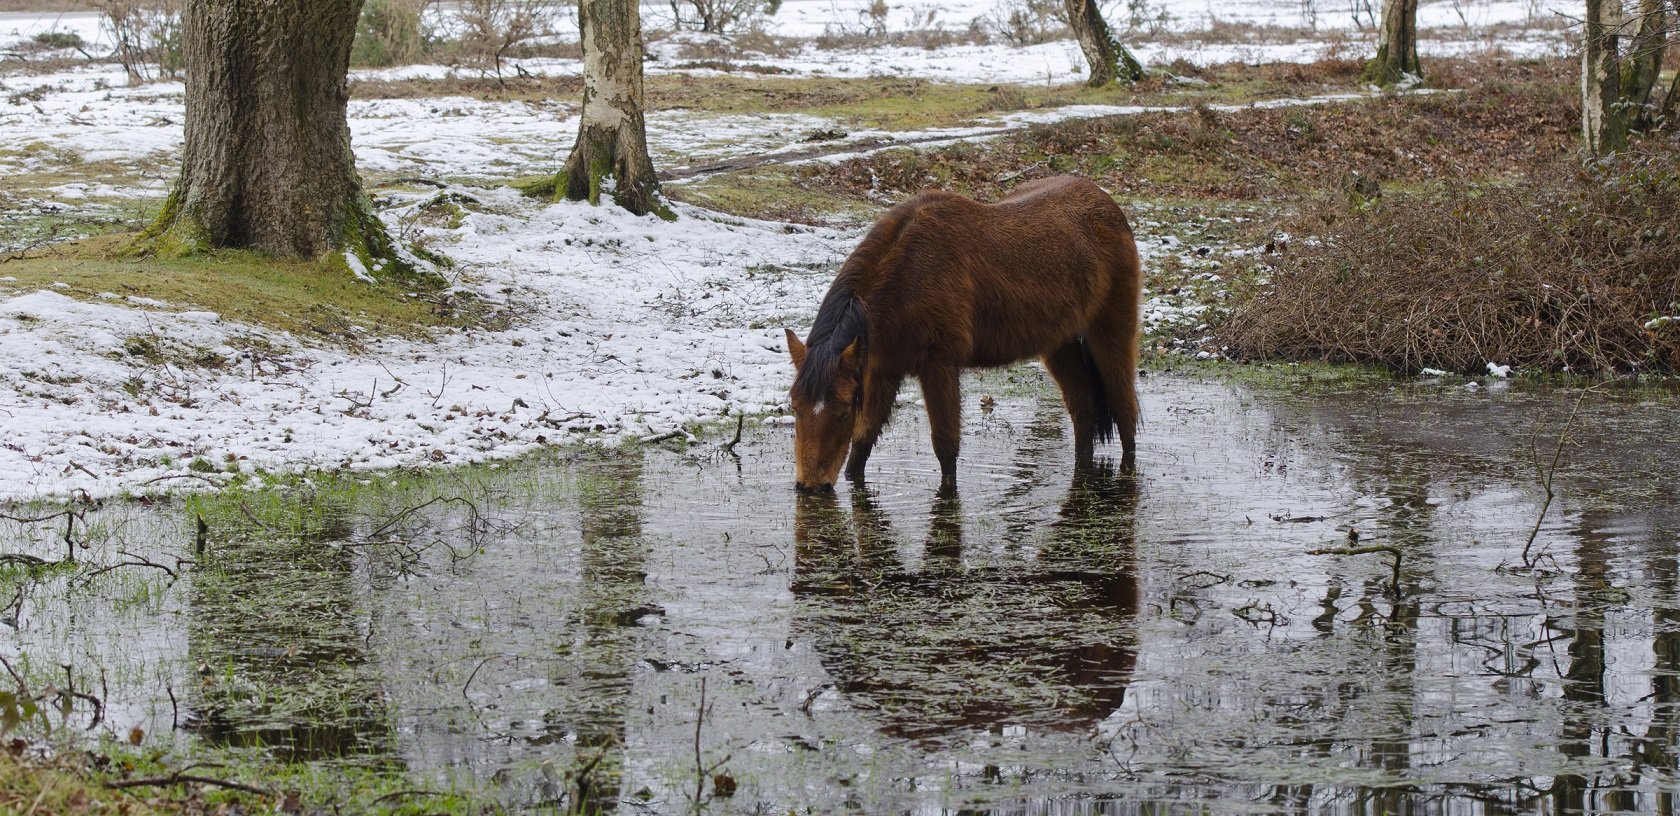 A pony standing in water on a snowy day